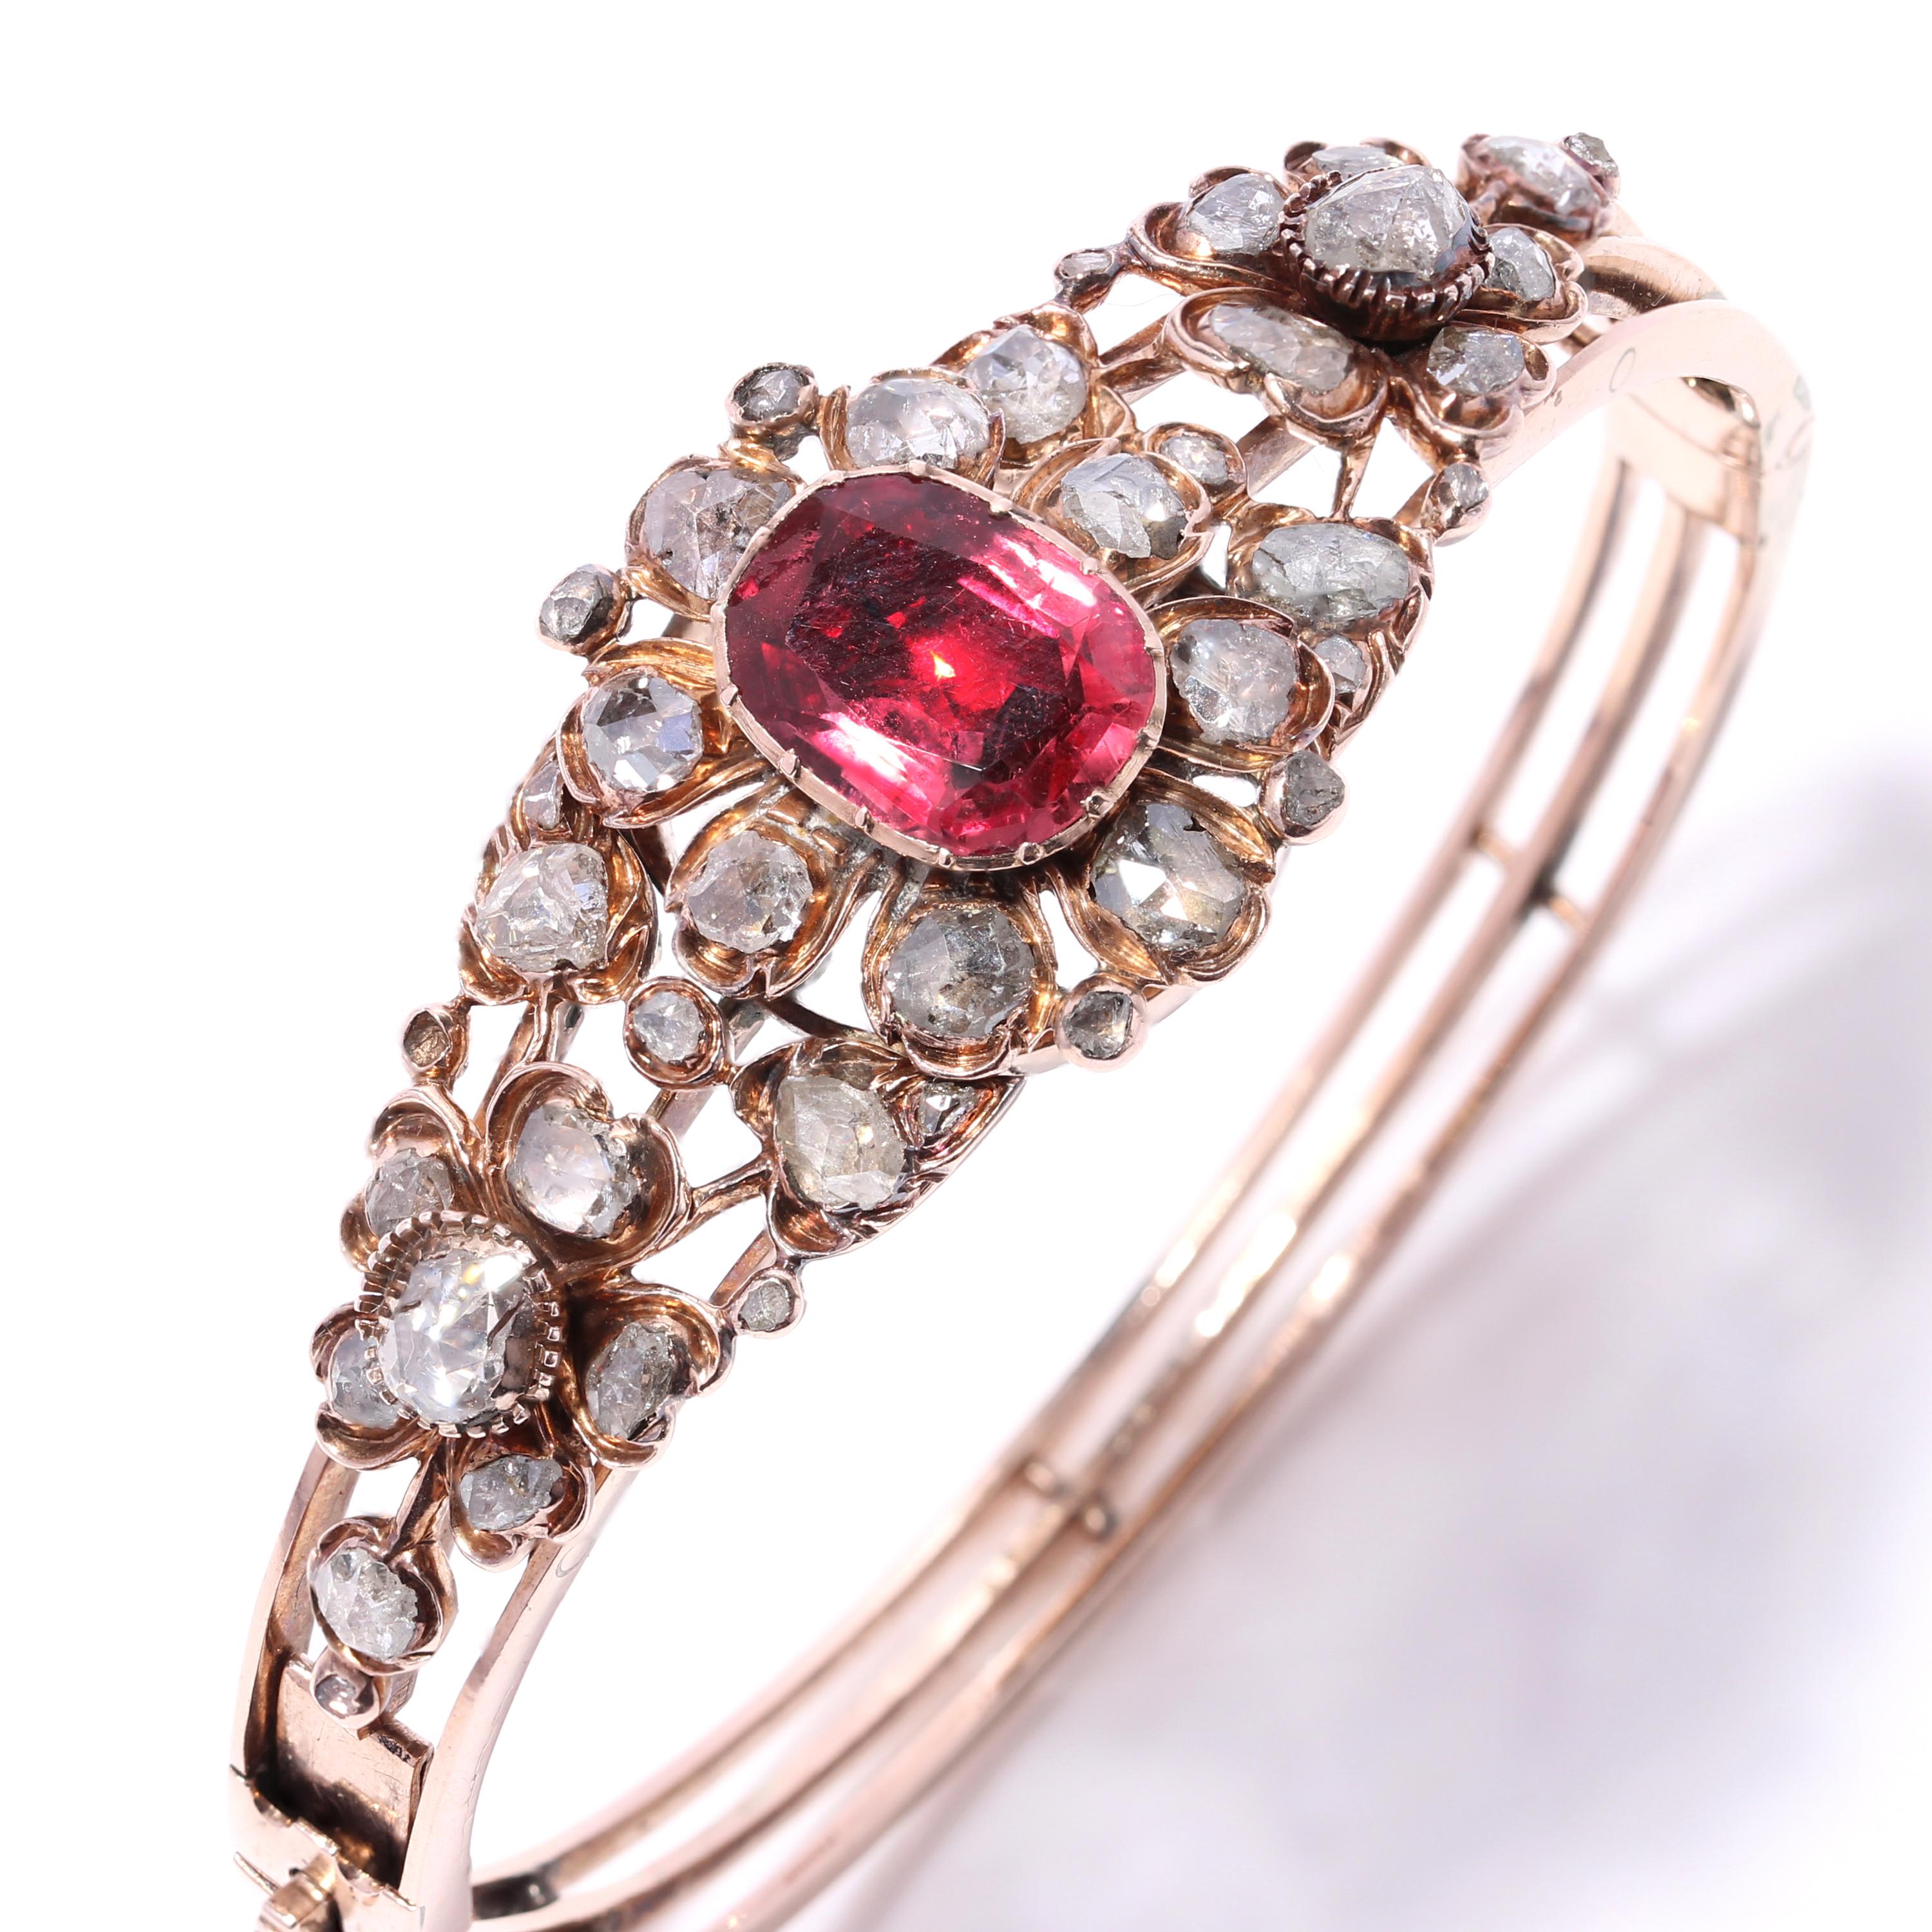 Antique Victorian 15kt pink gold ladies bangle with 4.00 ct. spinel and 4.52 ct. diamonds 
Made in England, Circa 1870's
Tested positive for 15kt gold.

Dimensions -
Size: 6.5 x 5.8 x 1.3 cm
Weight : 23.20 grams

Spinel -
Number of stones - 1 
Carat